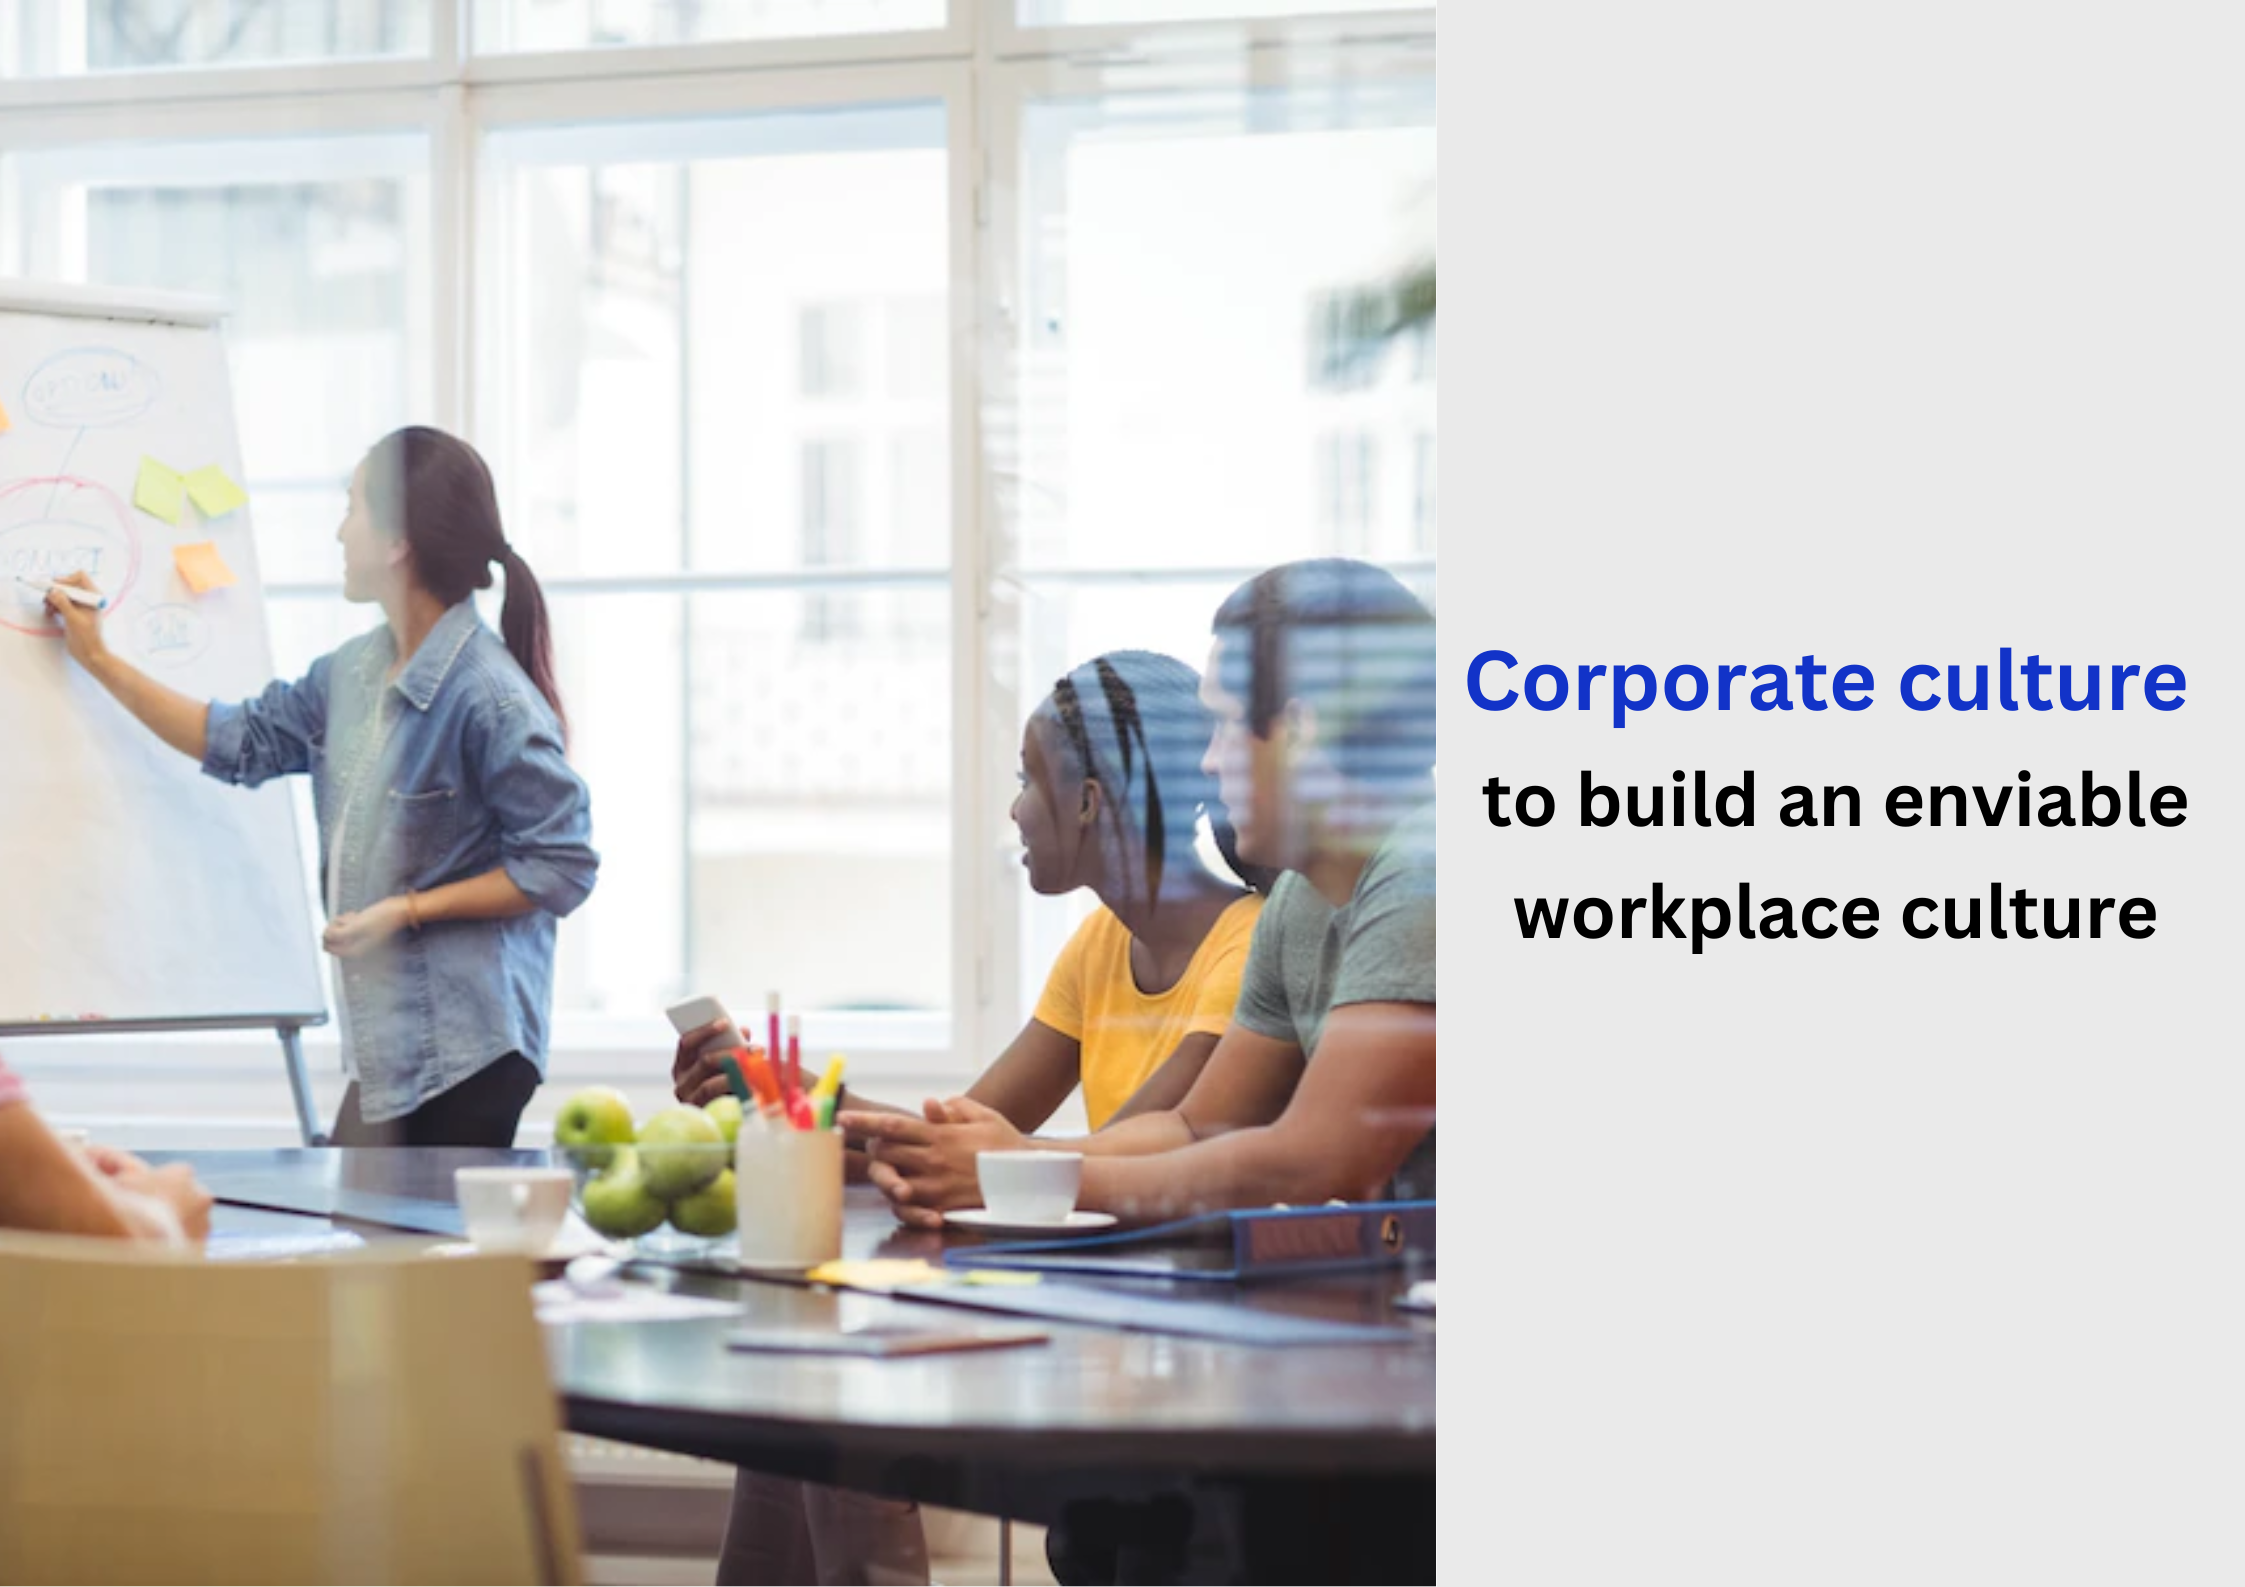 Corporate culture – to build an enviable workplace culture